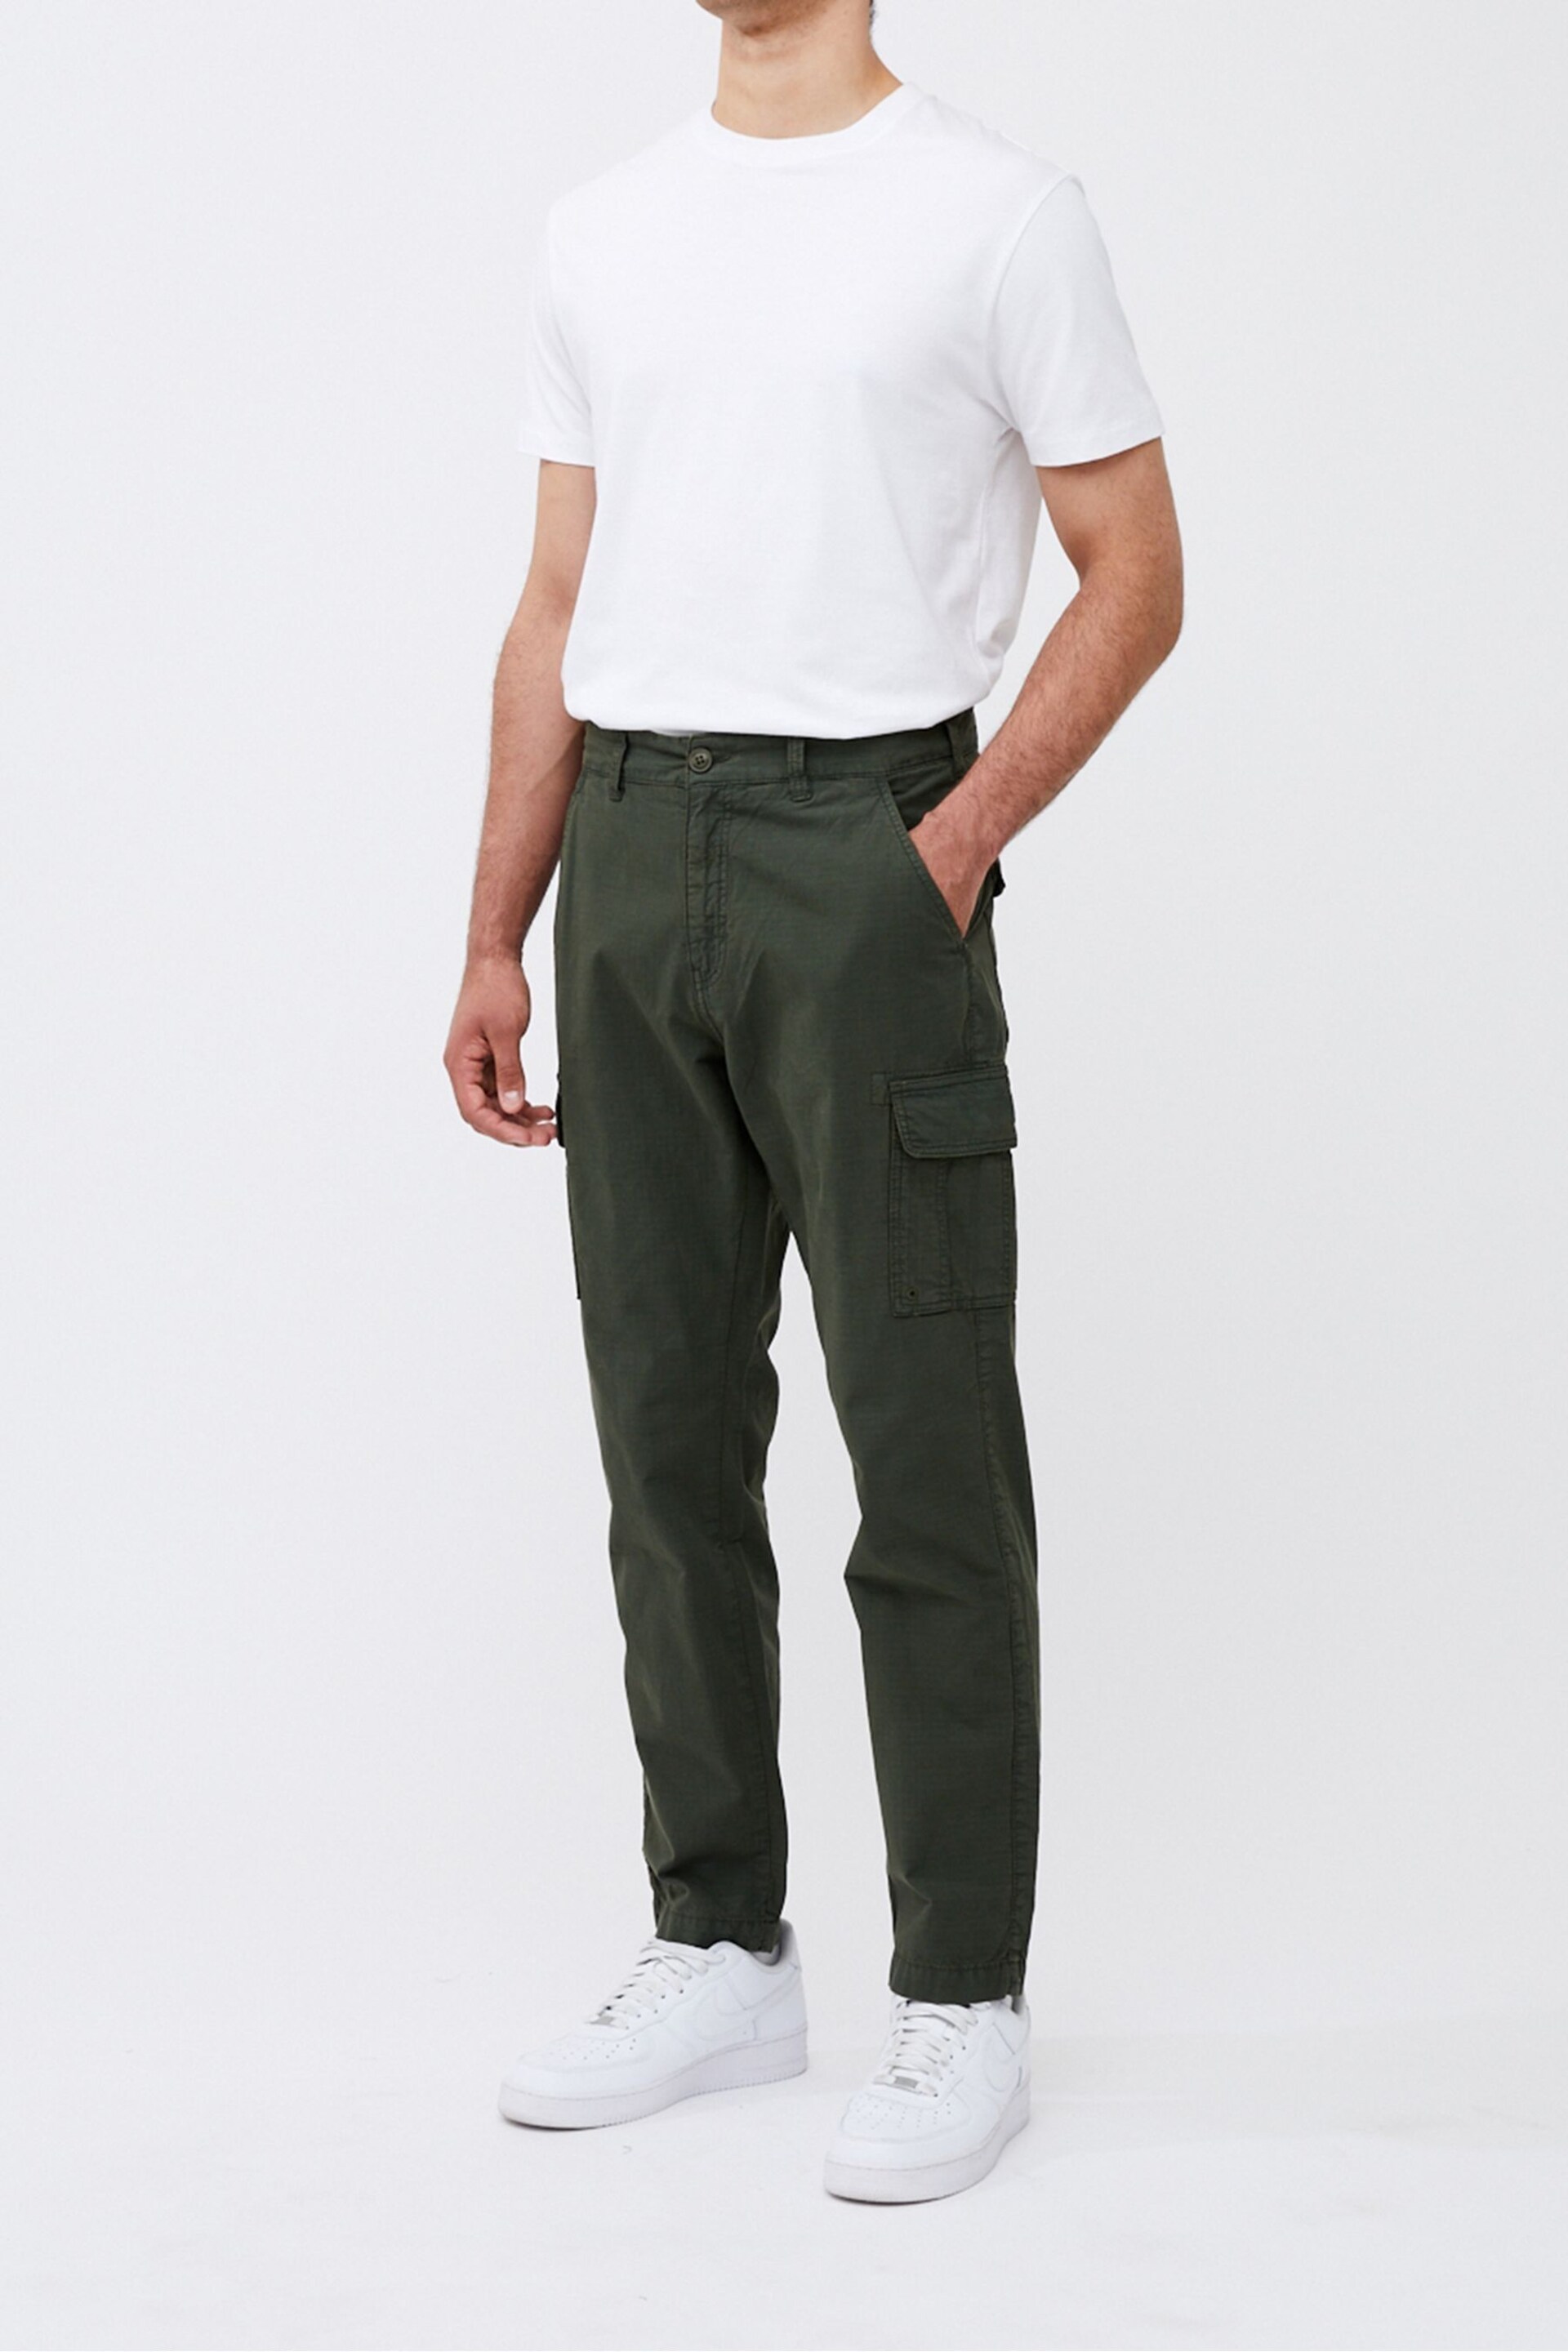 French Connection Natural Ripstop Cargo Trousers - Image 1 of 1